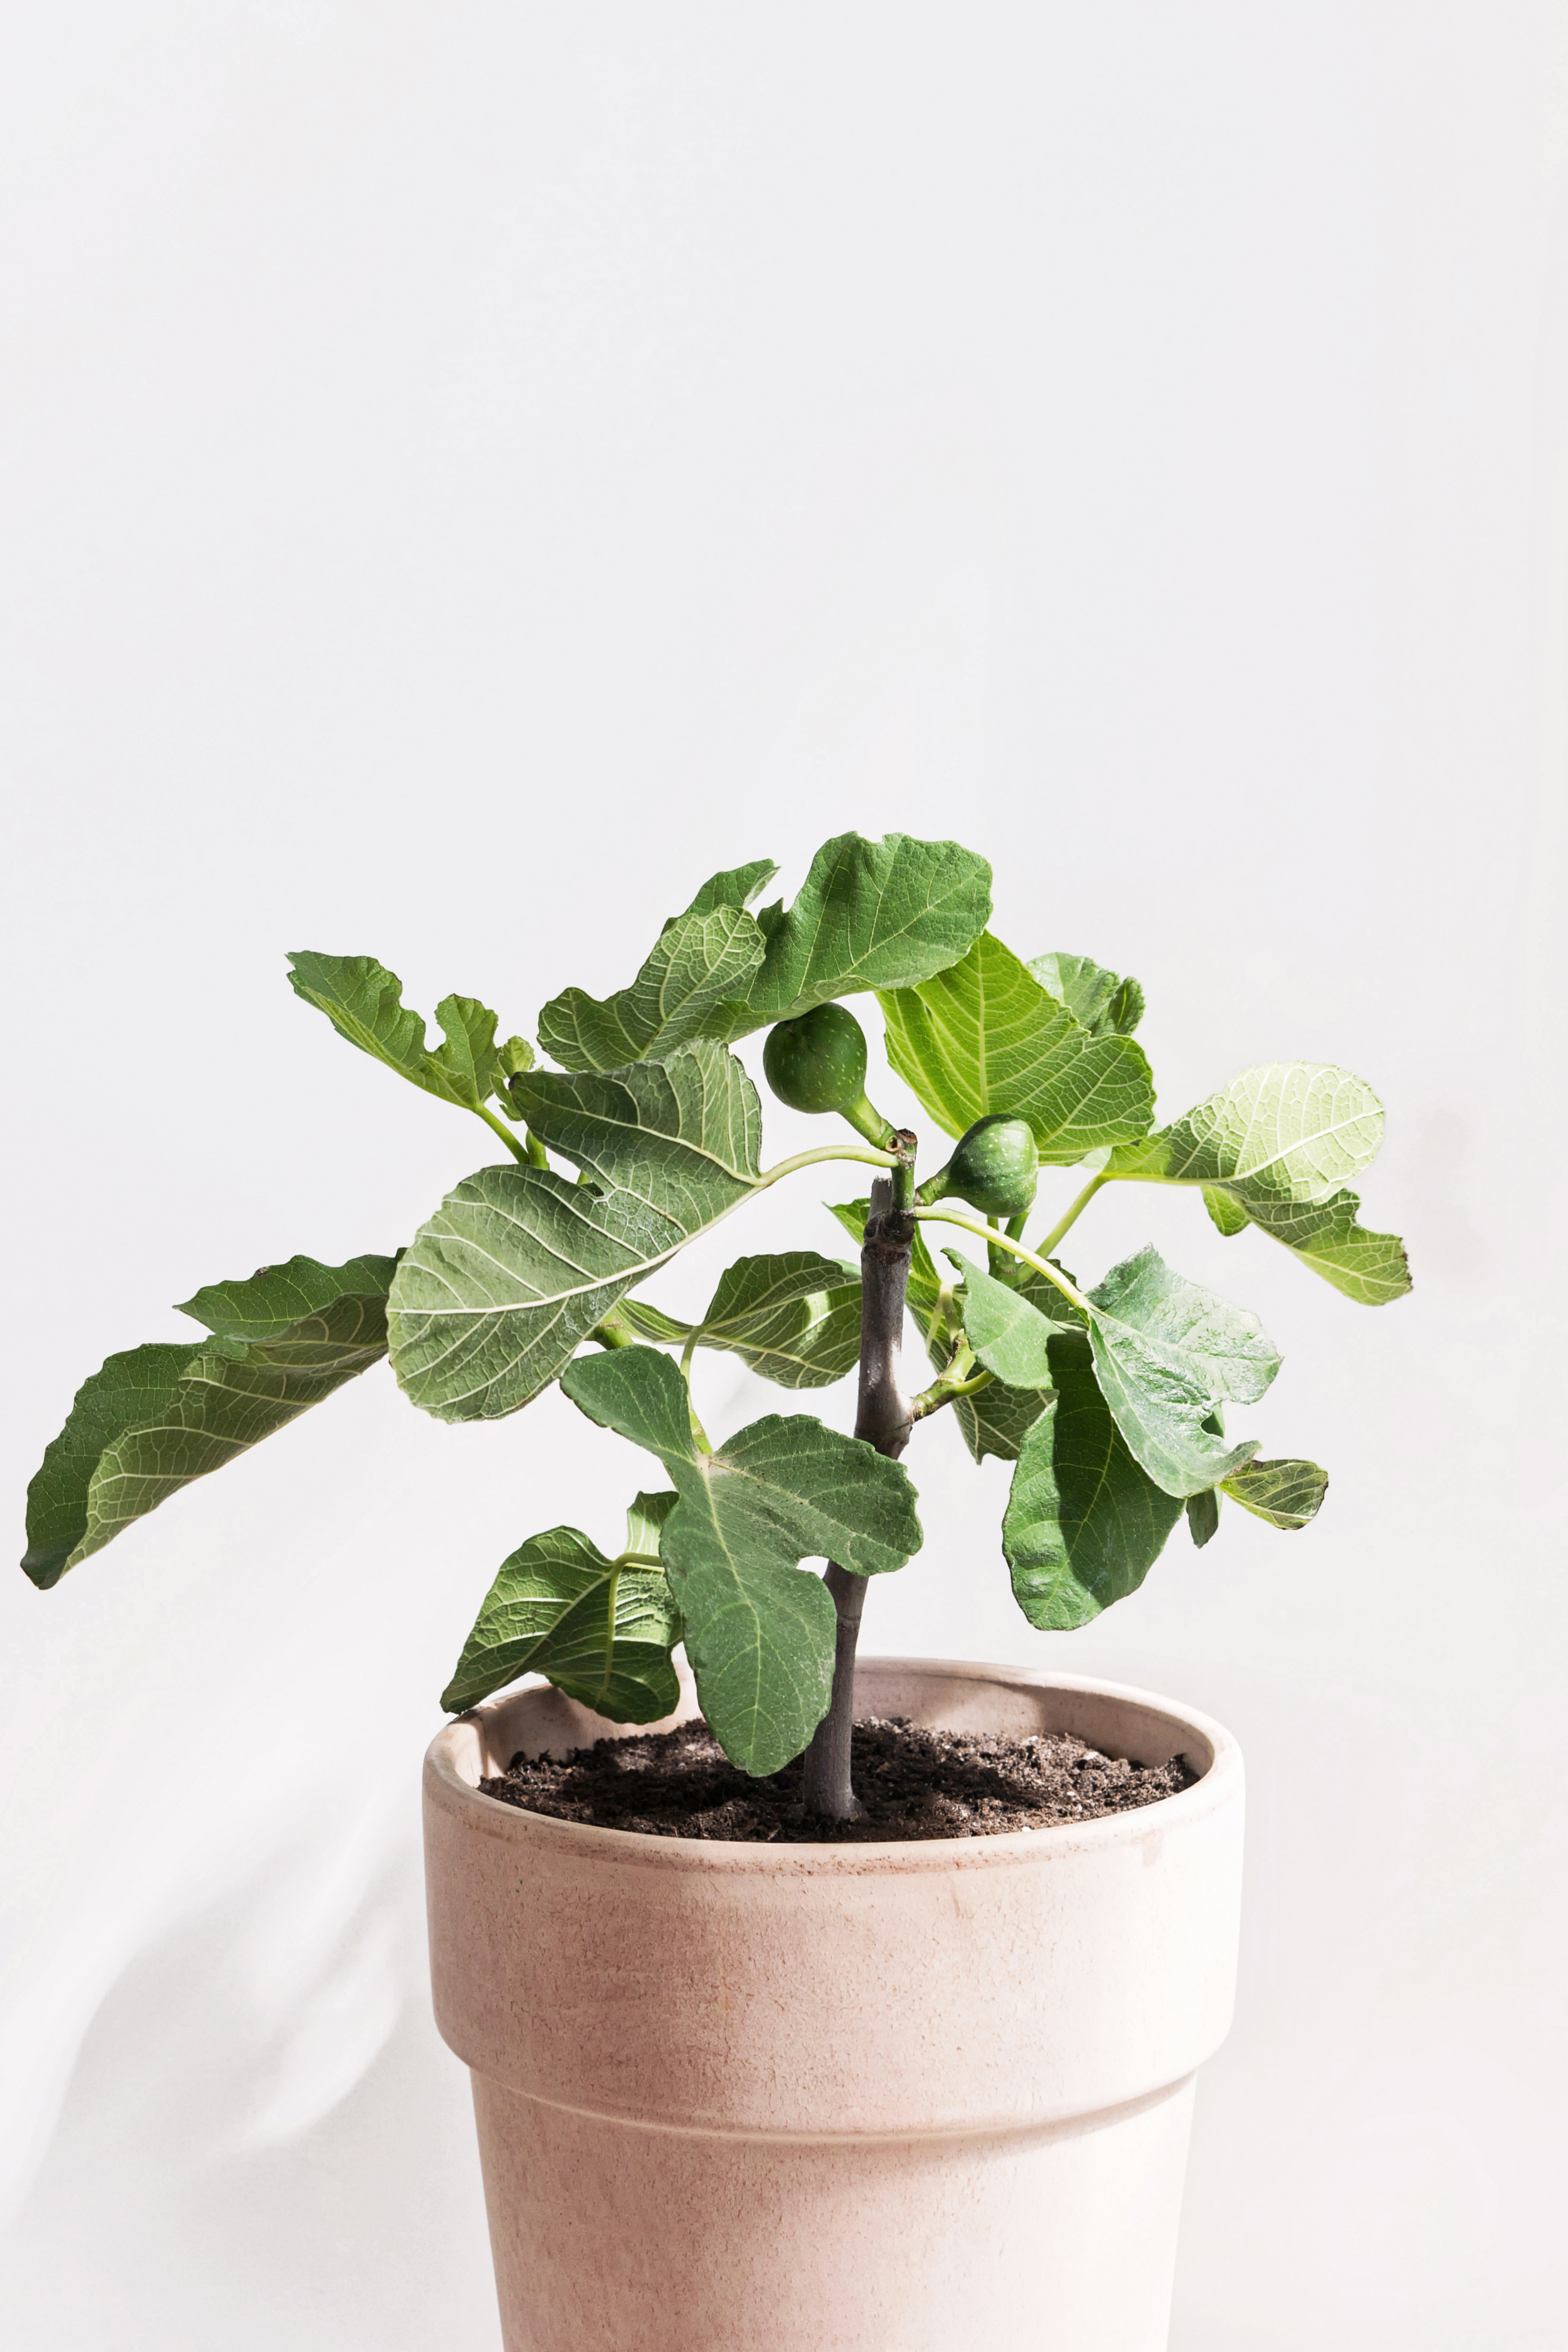 The best way to overwintering your Fig tree